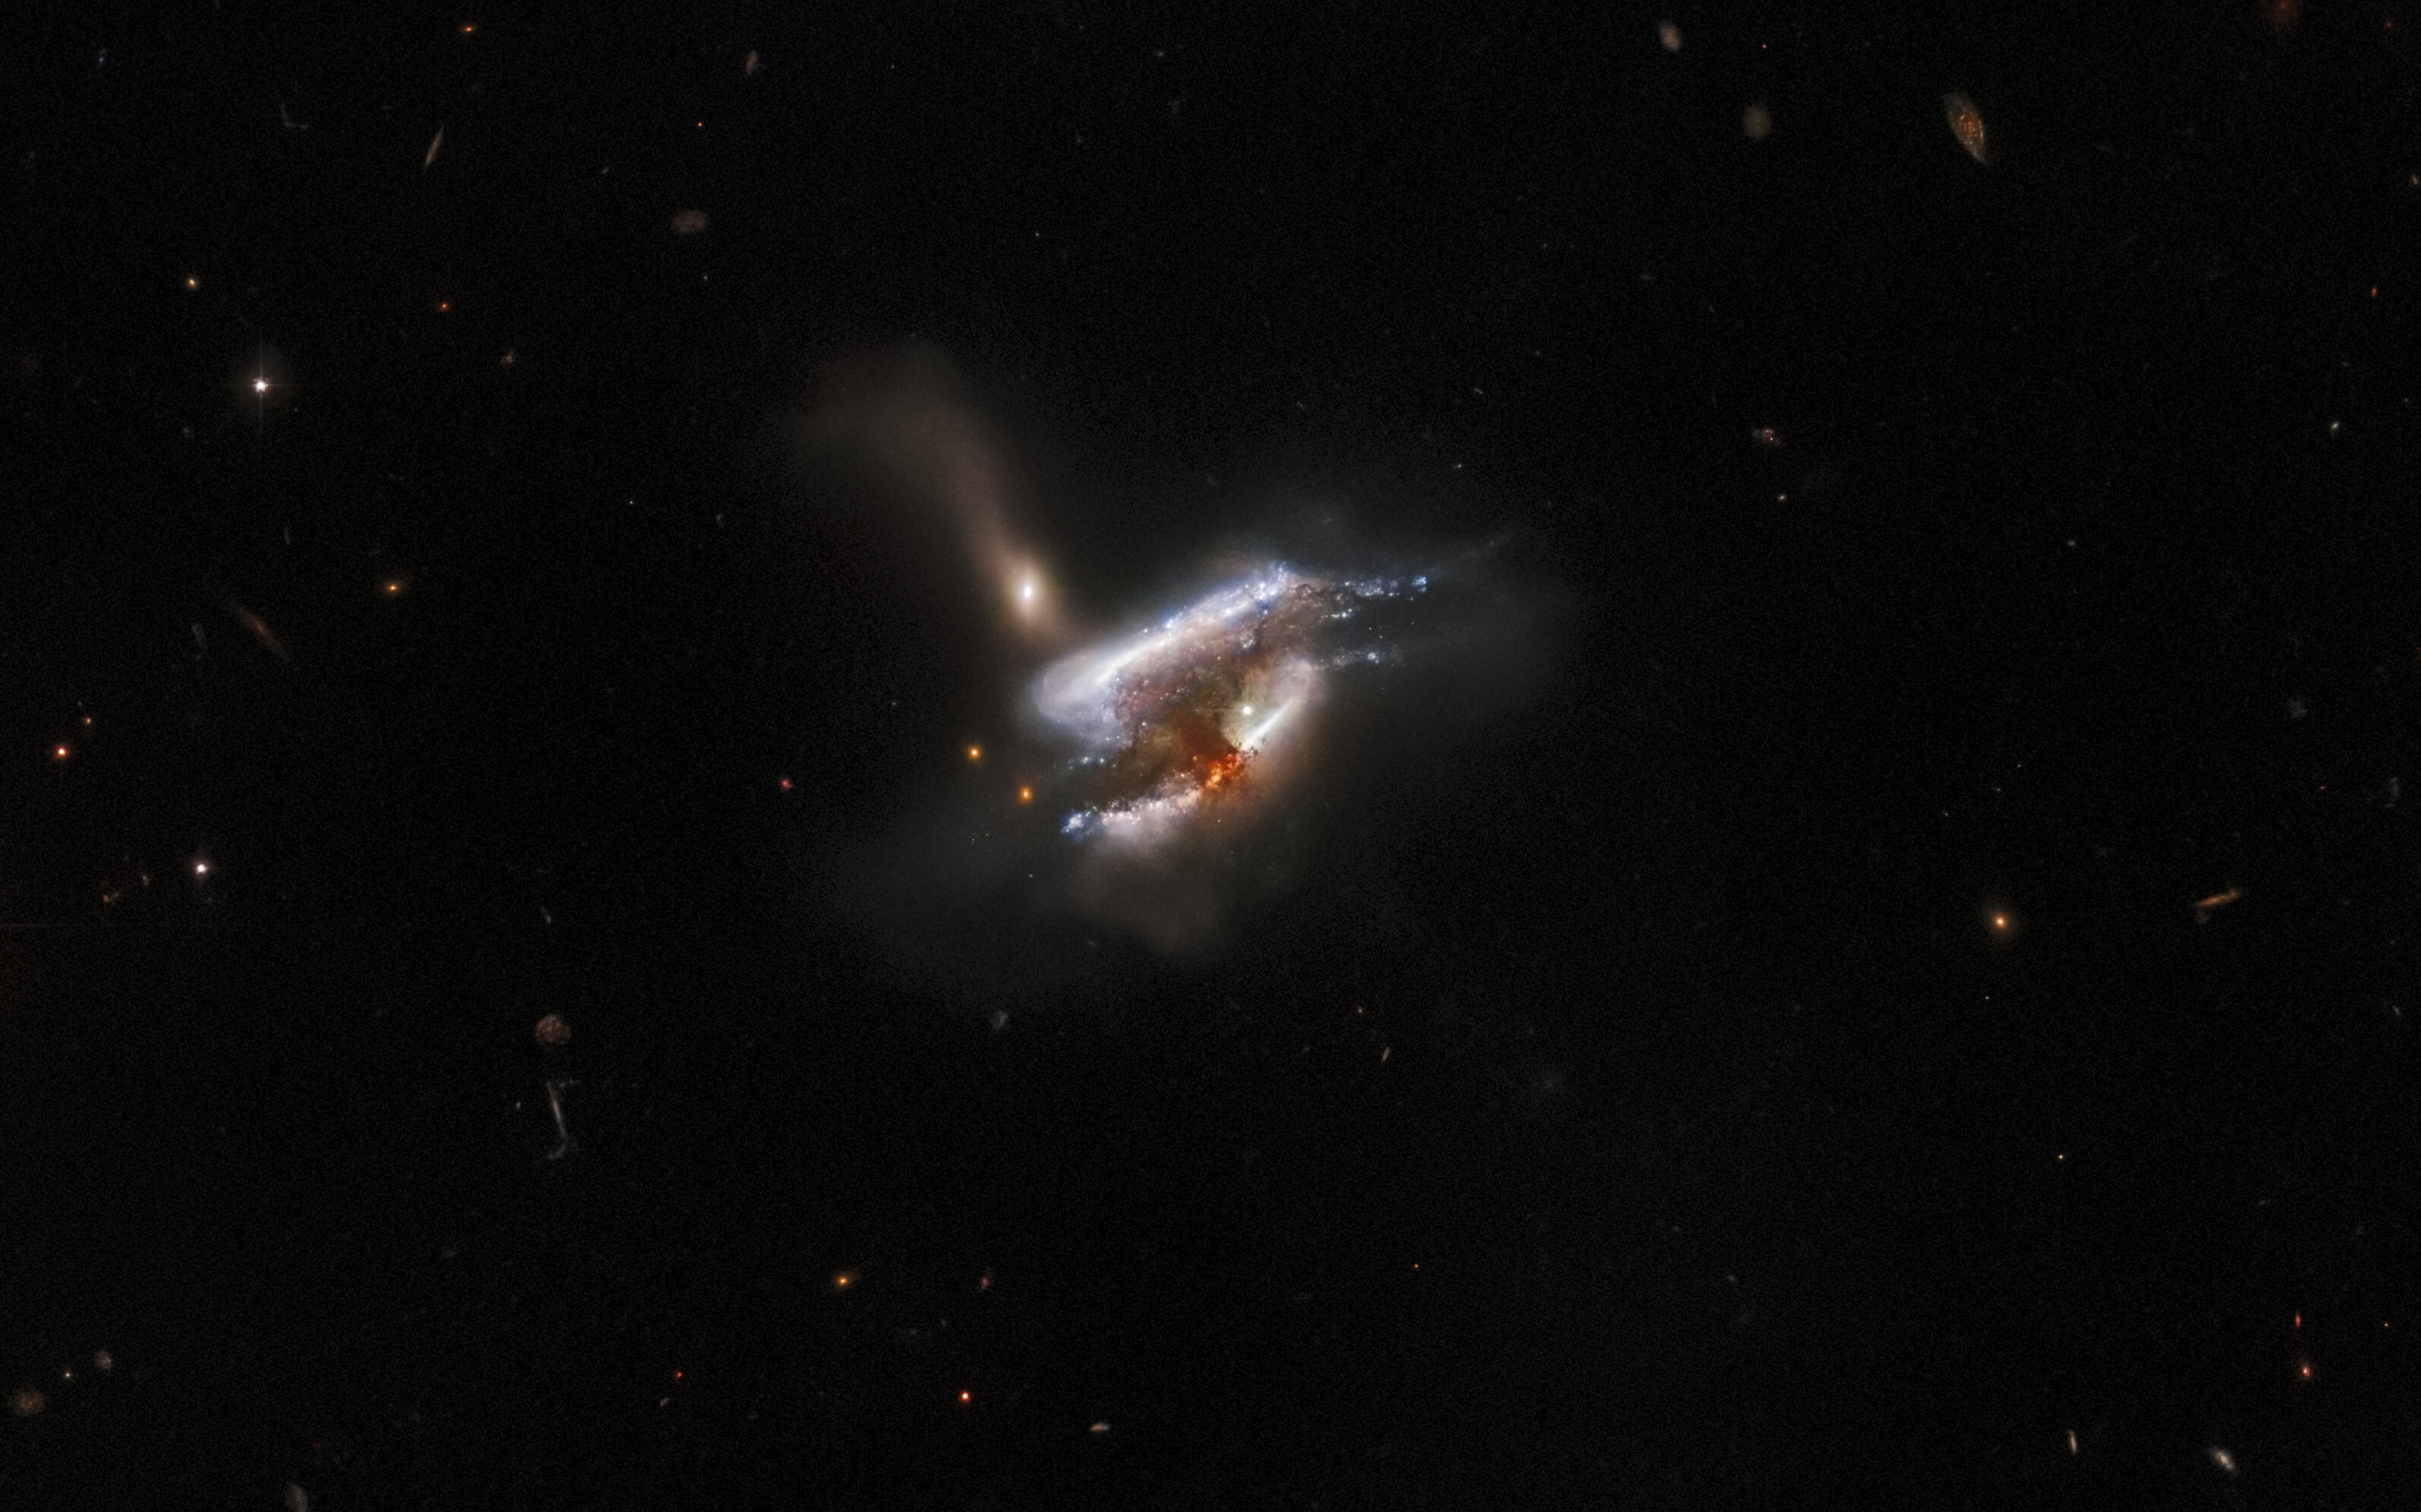 Three galaxies collide in this stunning new Hubble Space Telescope image showing the galaxy cluster IC 2431 about 681 million light-years from Earth.